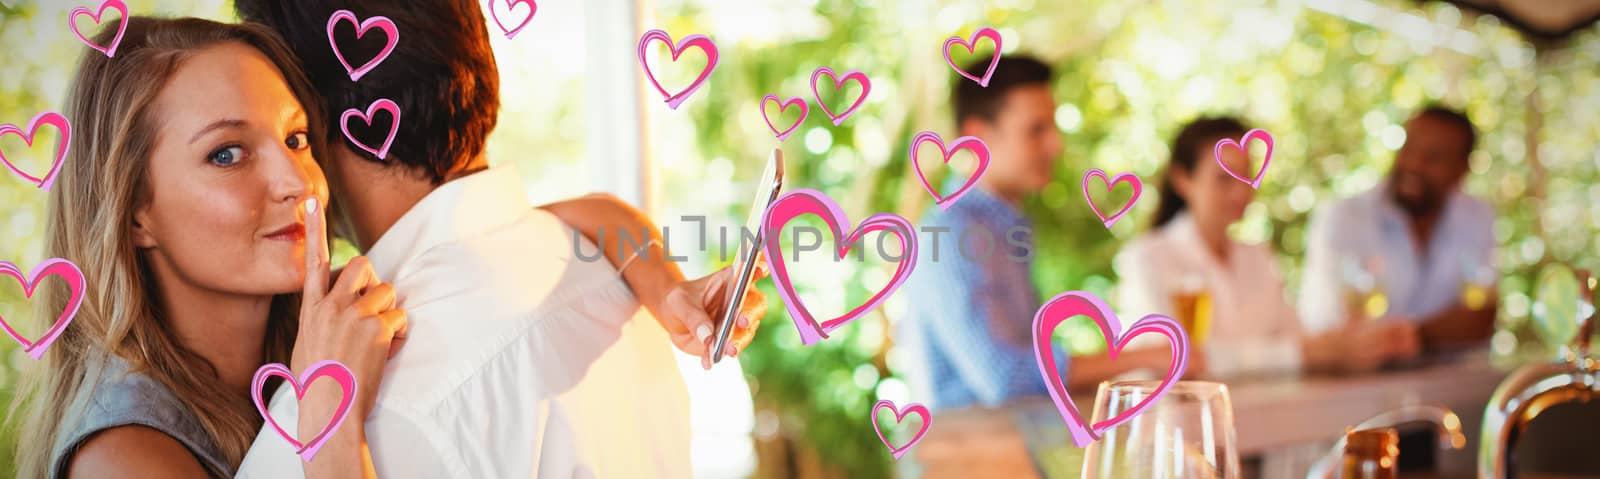 Red Hearts against couple embracing while using mobile phone